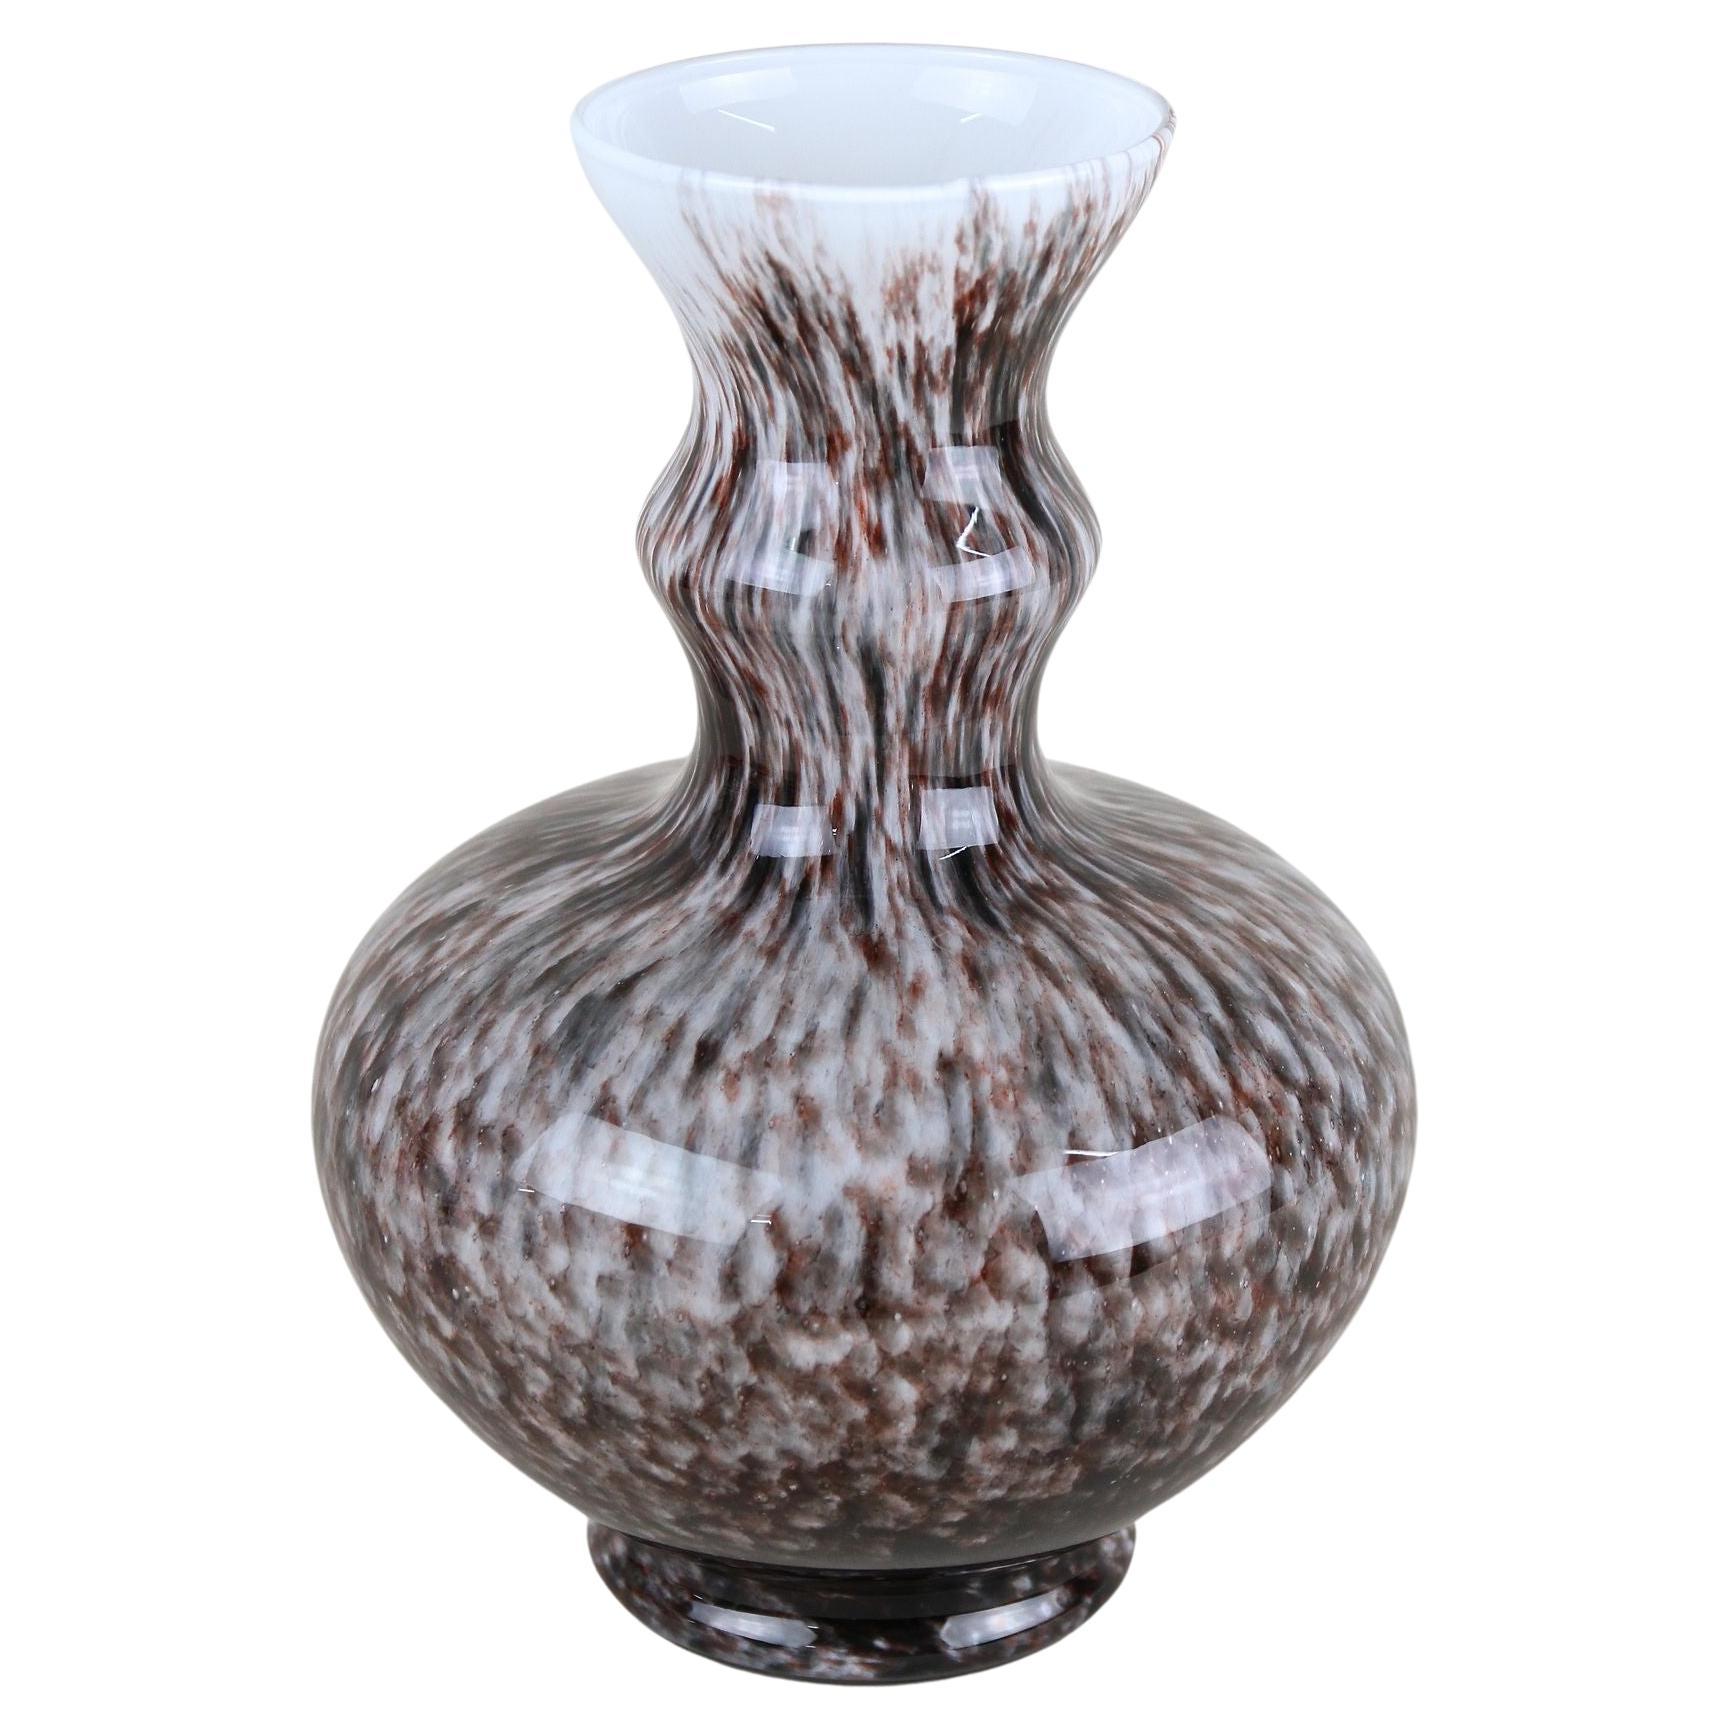 Bulbous Murano Glass Vase With Brown, Grey & Black Tones, Italy circa 1970 For Sale